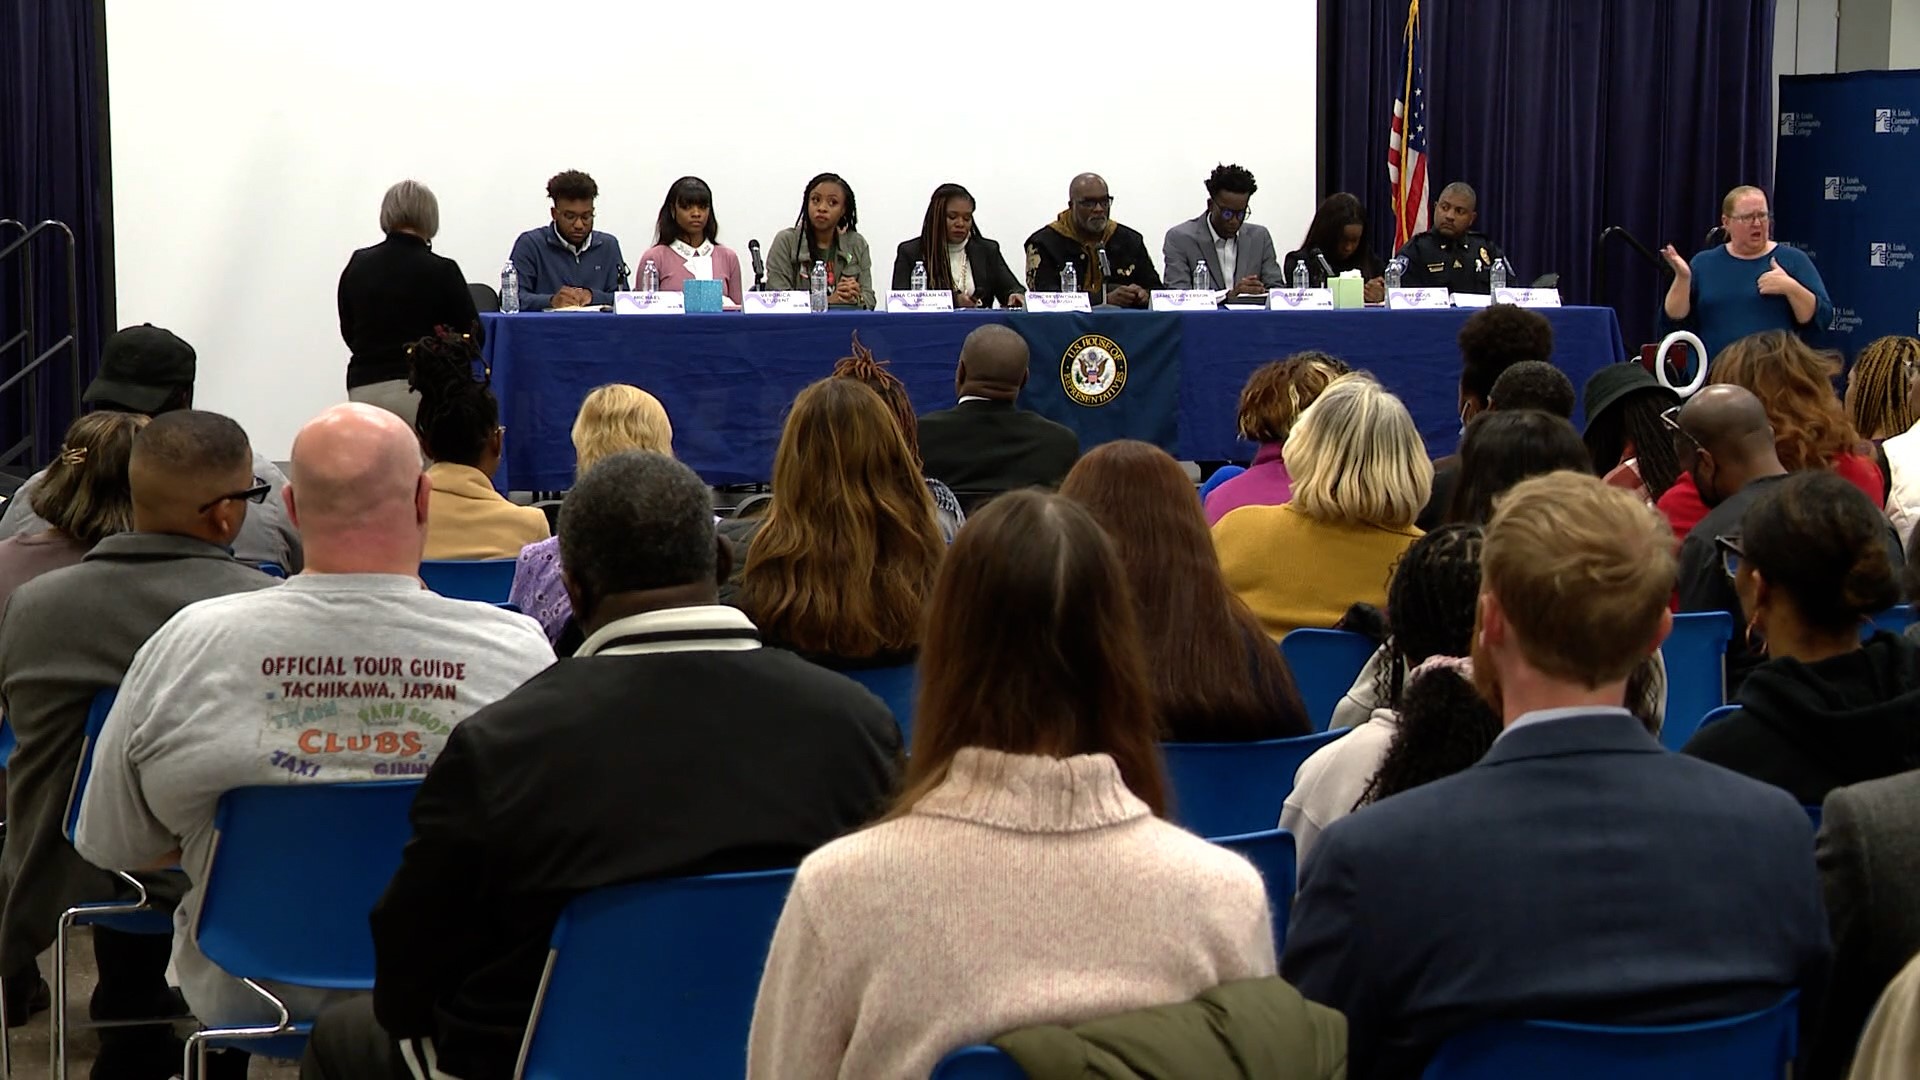 Elected officials, clergy members, parents and many others meet for town hall meeting to ensure school safety